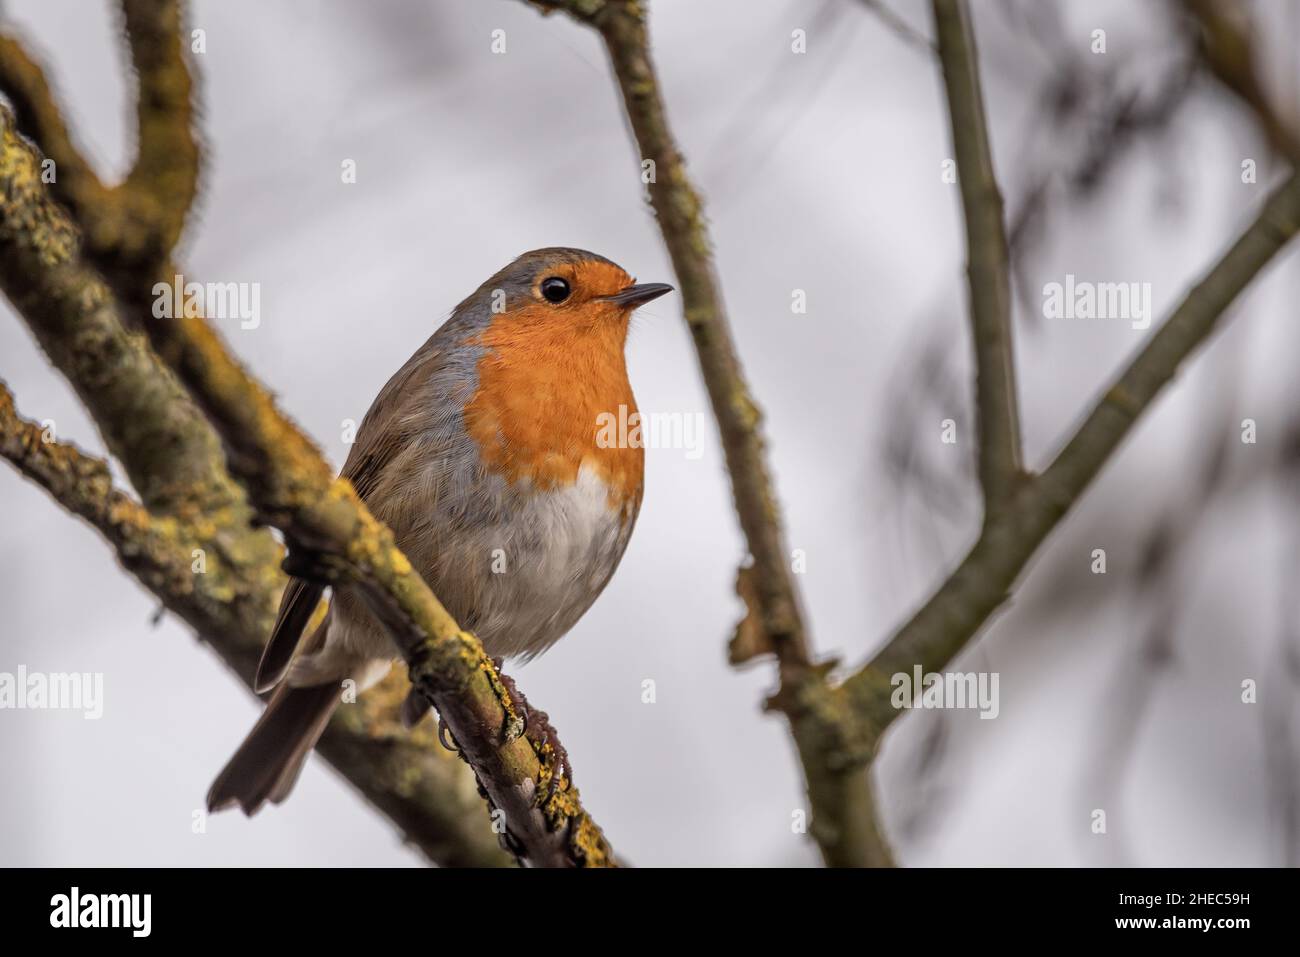 Robin on a branch Stock Photo